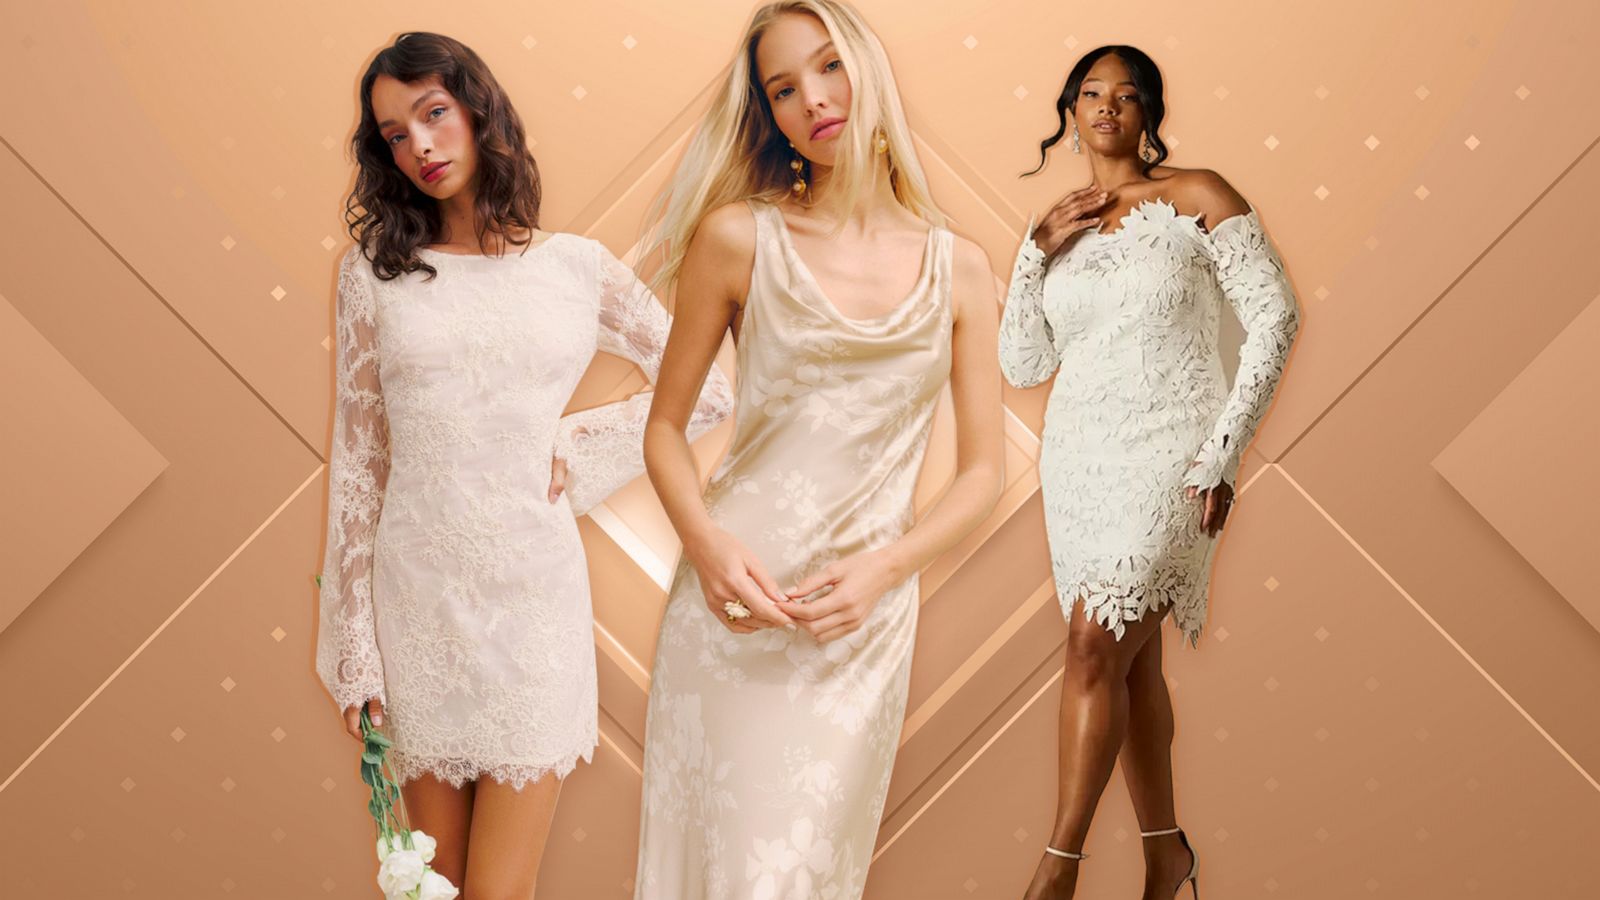 What to wear to your courthouse wedding, according to a bridal